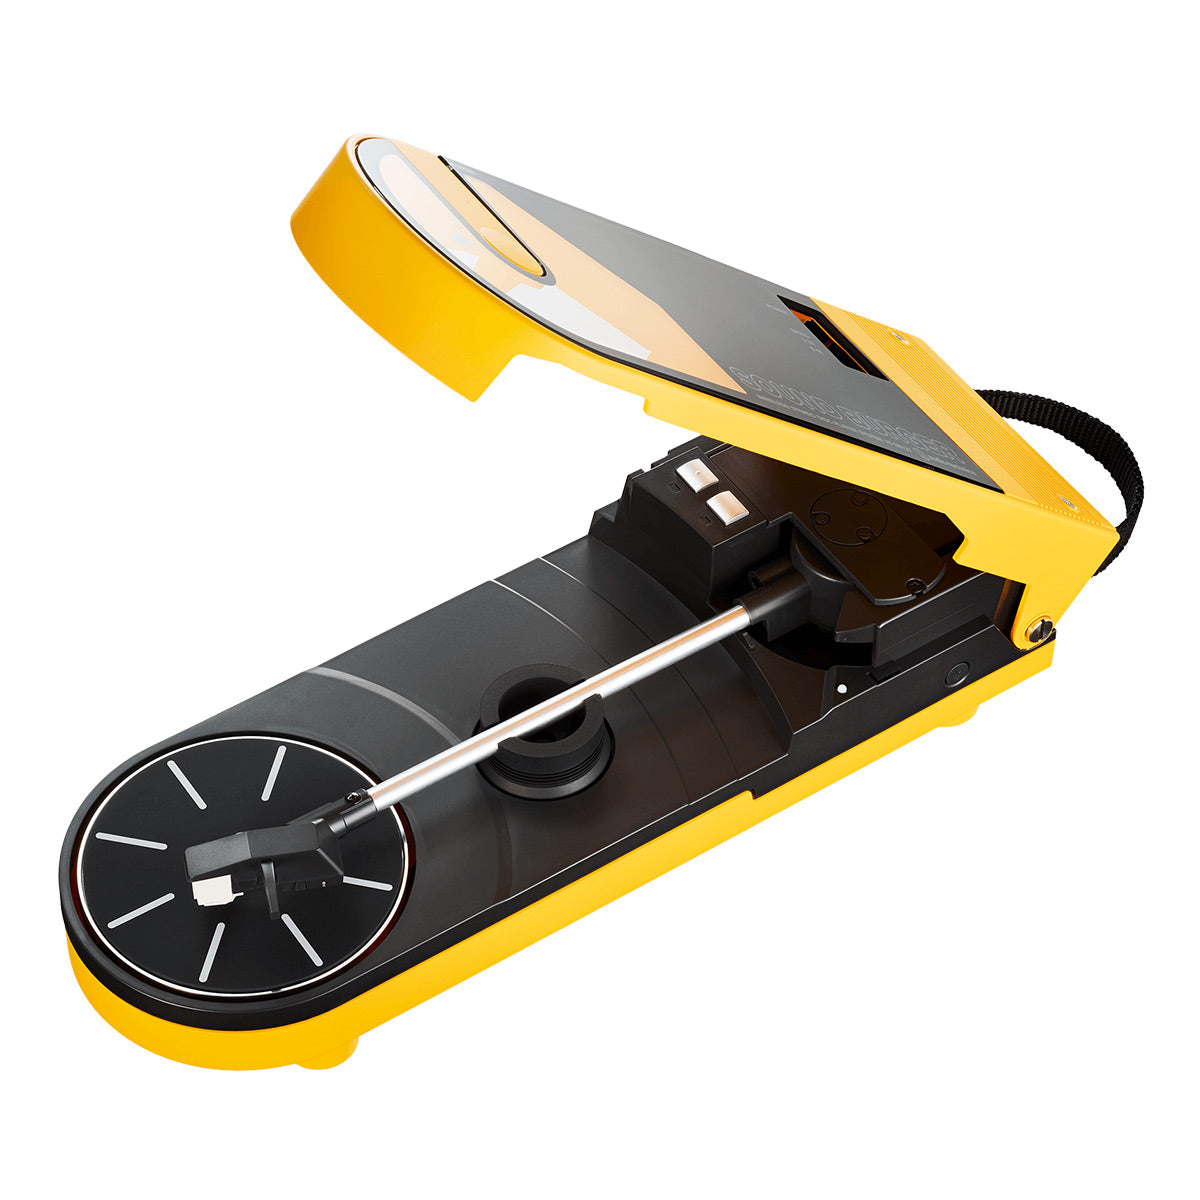 Audio-Technica AT-SB727 Sound Burger Portable Turntable with Bluetooth (Yellow)